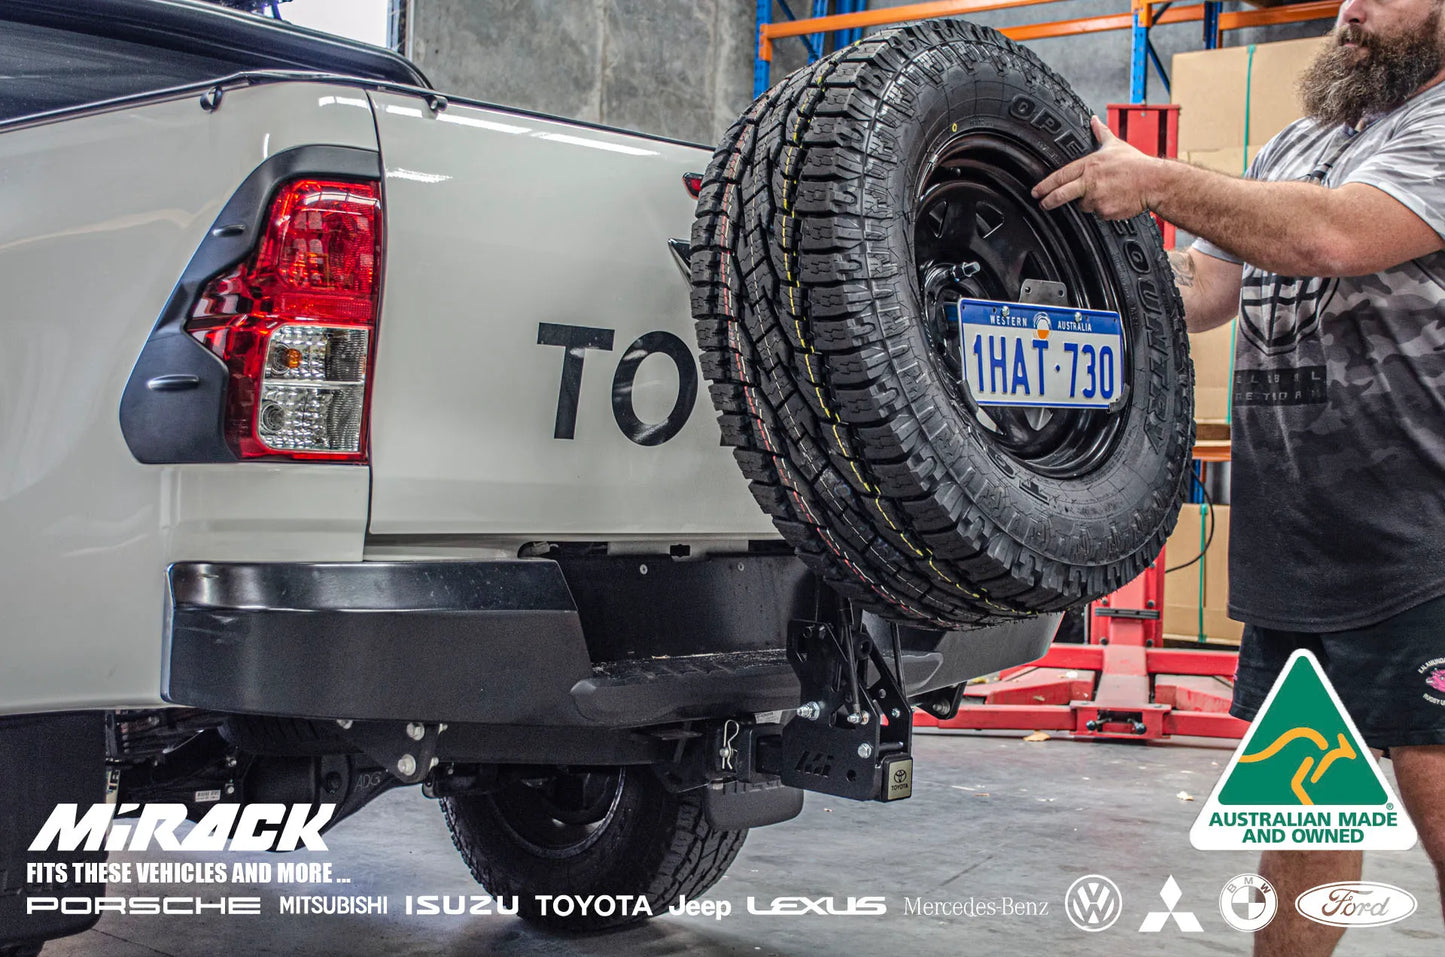 Toyota Hilux SR5 aftermarket upgrade: Mirack's innovative tilting spare wheel carrier for enhanced rear functionality and epic off-road adventures.